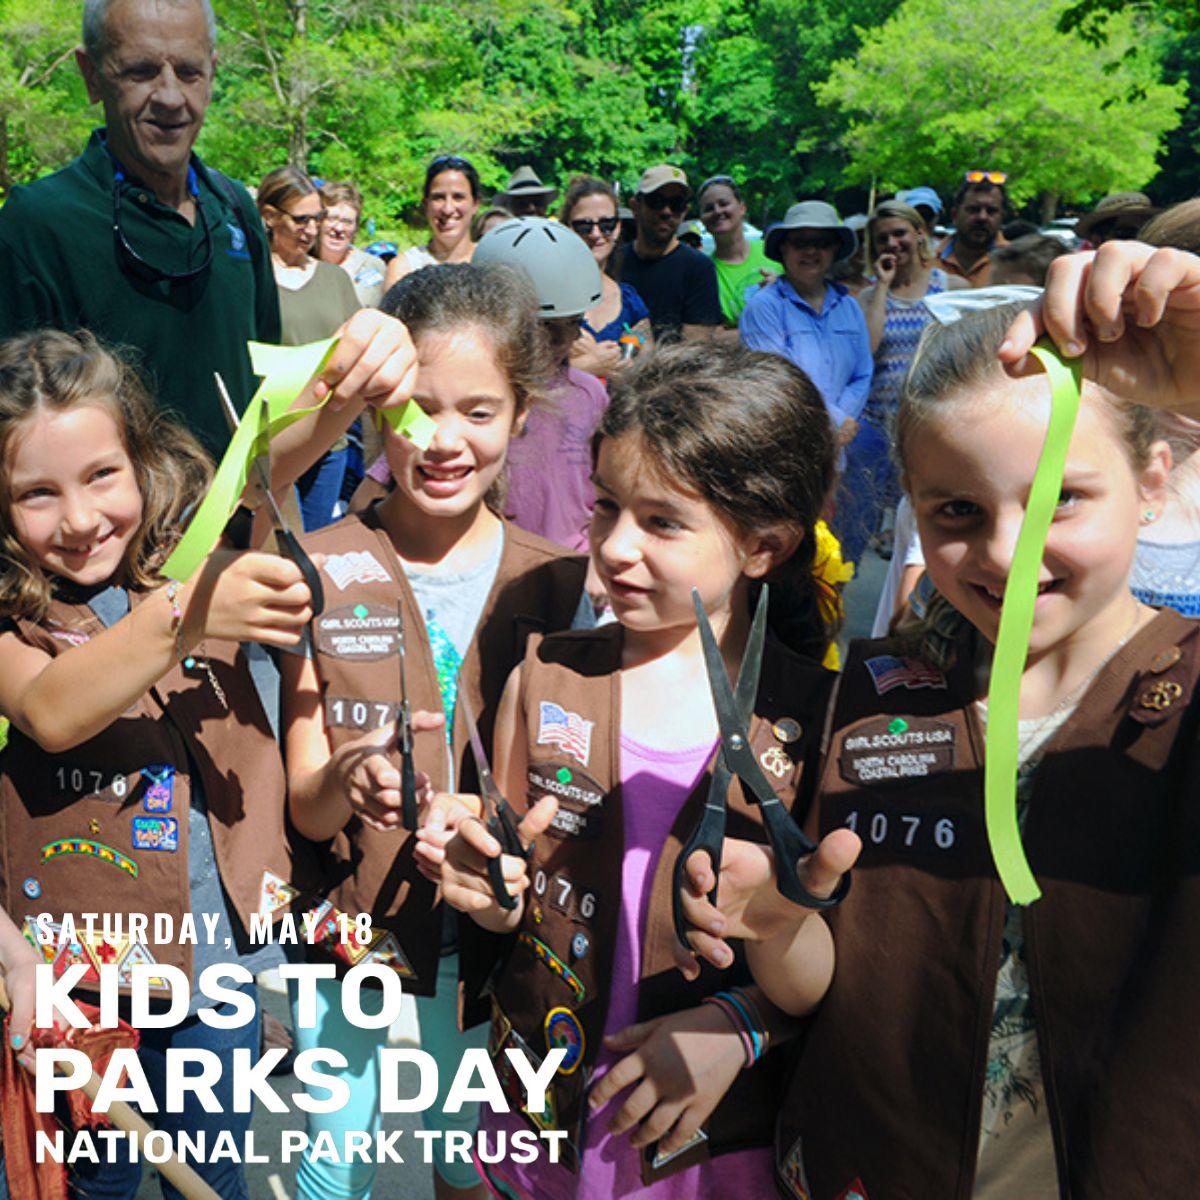 Happy Kids to Parks Day! Celebrate with us and @NationalParkTrust today by getting outside and enjoying a local park. 

Share a photo and tag us at @chapelhillparks on Facebook and Instagram for a chance to be reposted.

Use the hashtag #KidstoParksDay so we can follow along too!